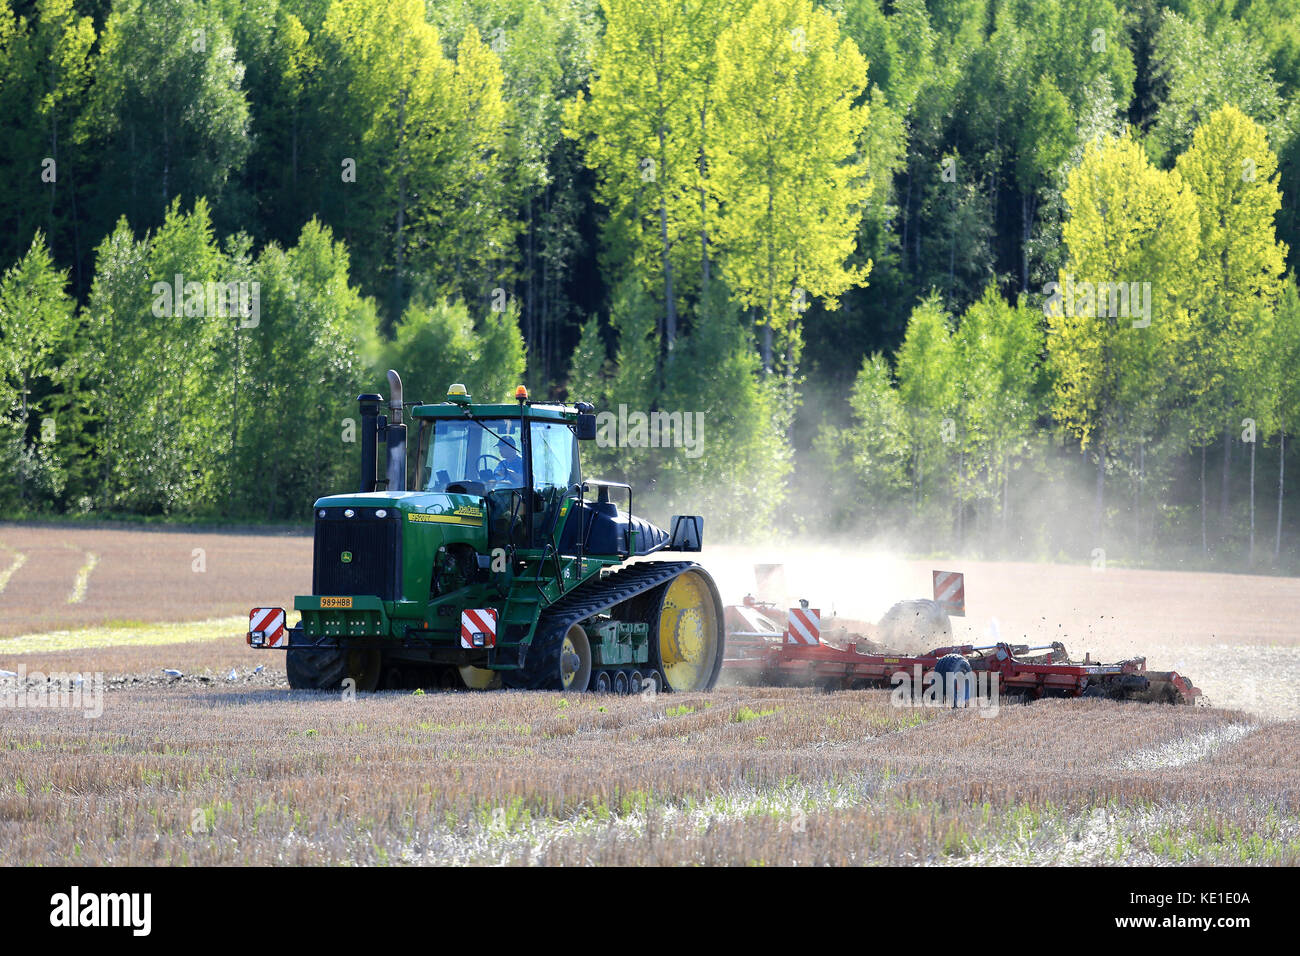 SALO, FINLAND - MAY 27, 2016: John Deere 9520T agricultural crawler tractor and cultivator on field at spring in South of Finland. Stock Photo